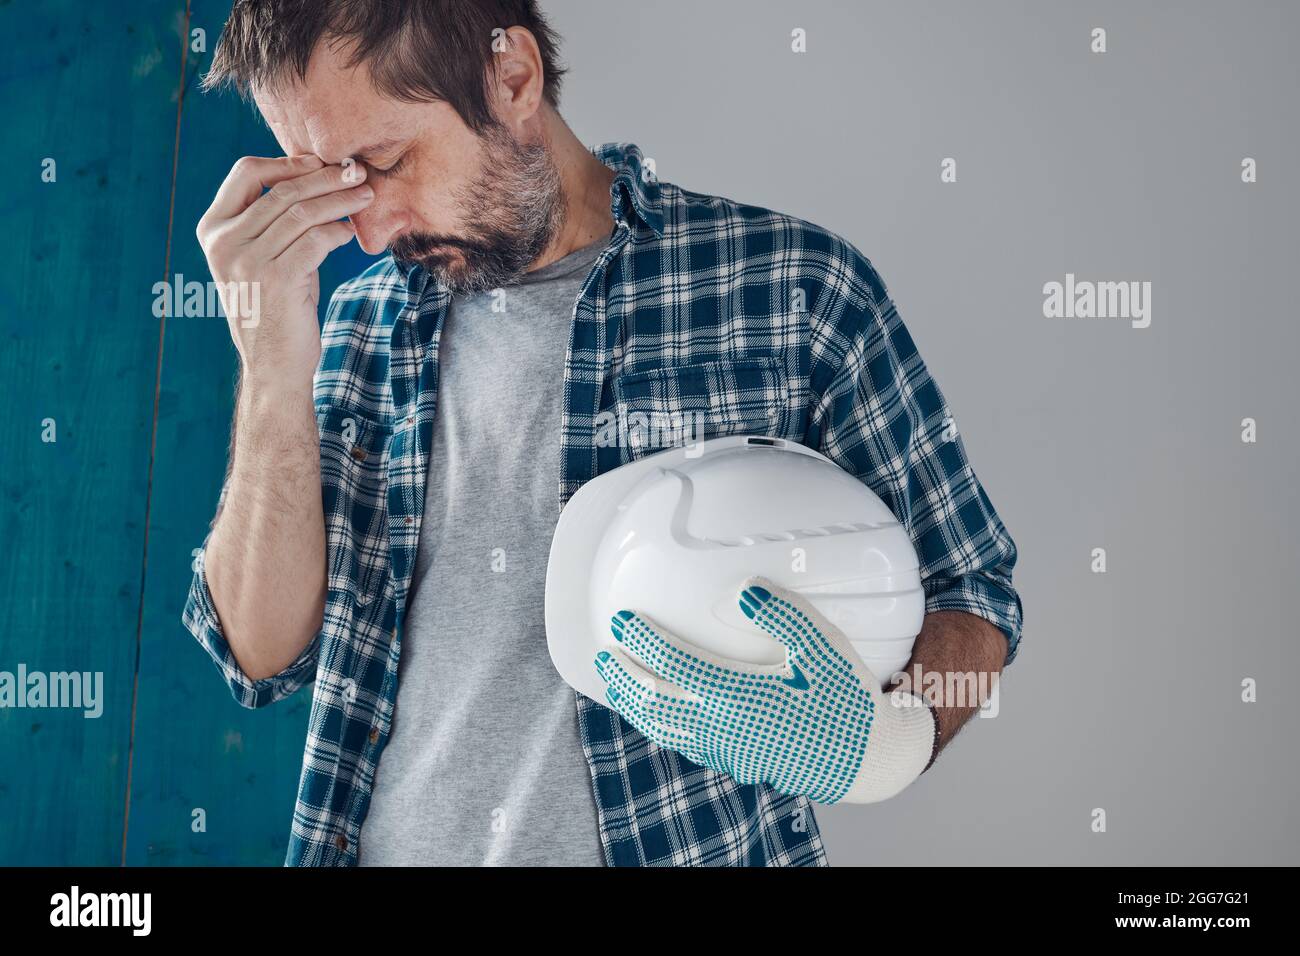 Tired and worried construction industry engineer feeling exhausted and disappointed Stock Photo